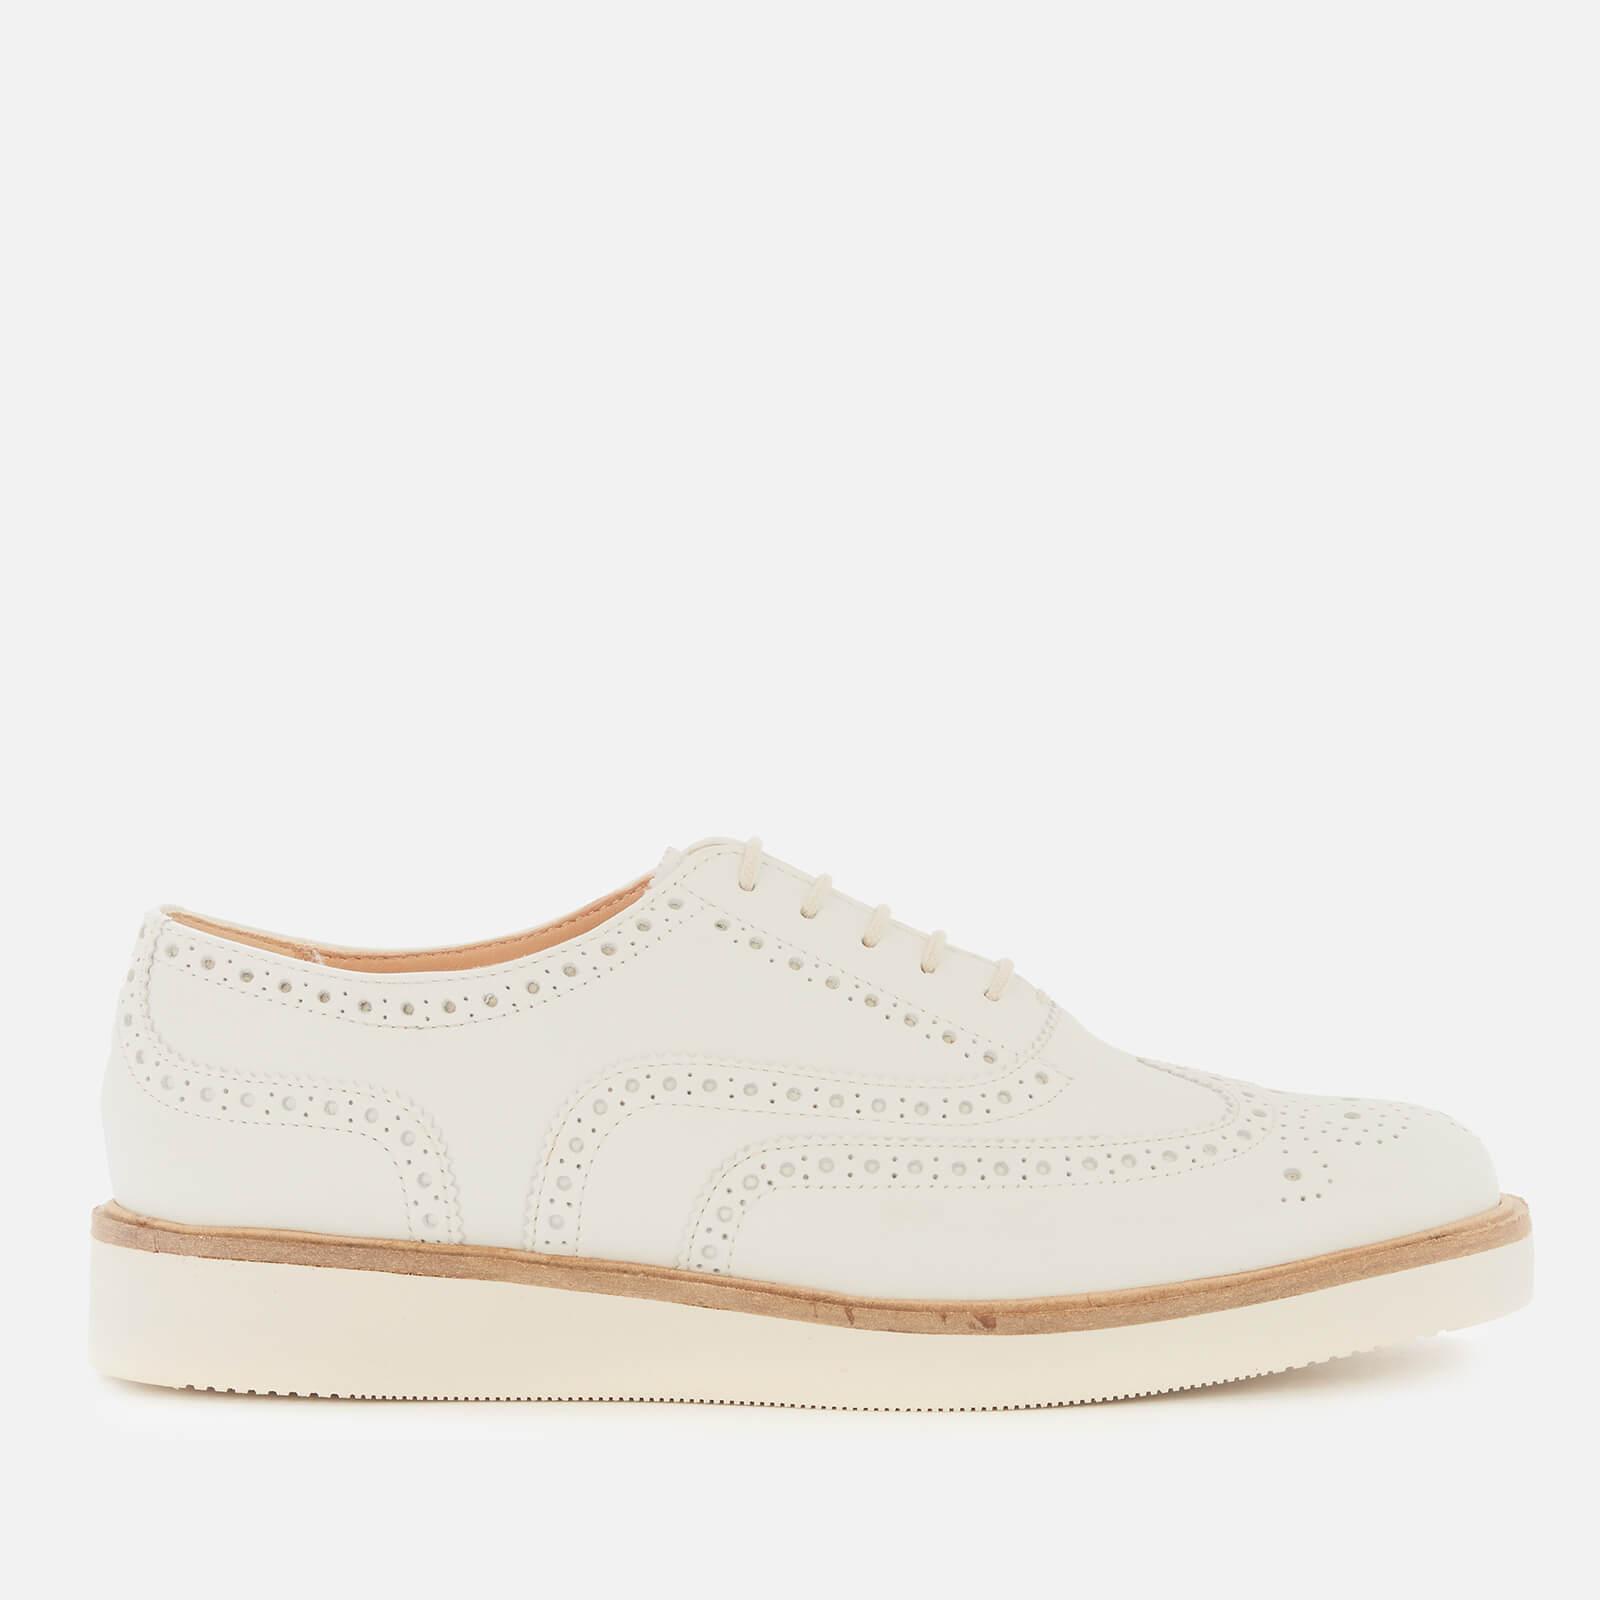 Clarks Baille Leather Brogues in White | Lyst